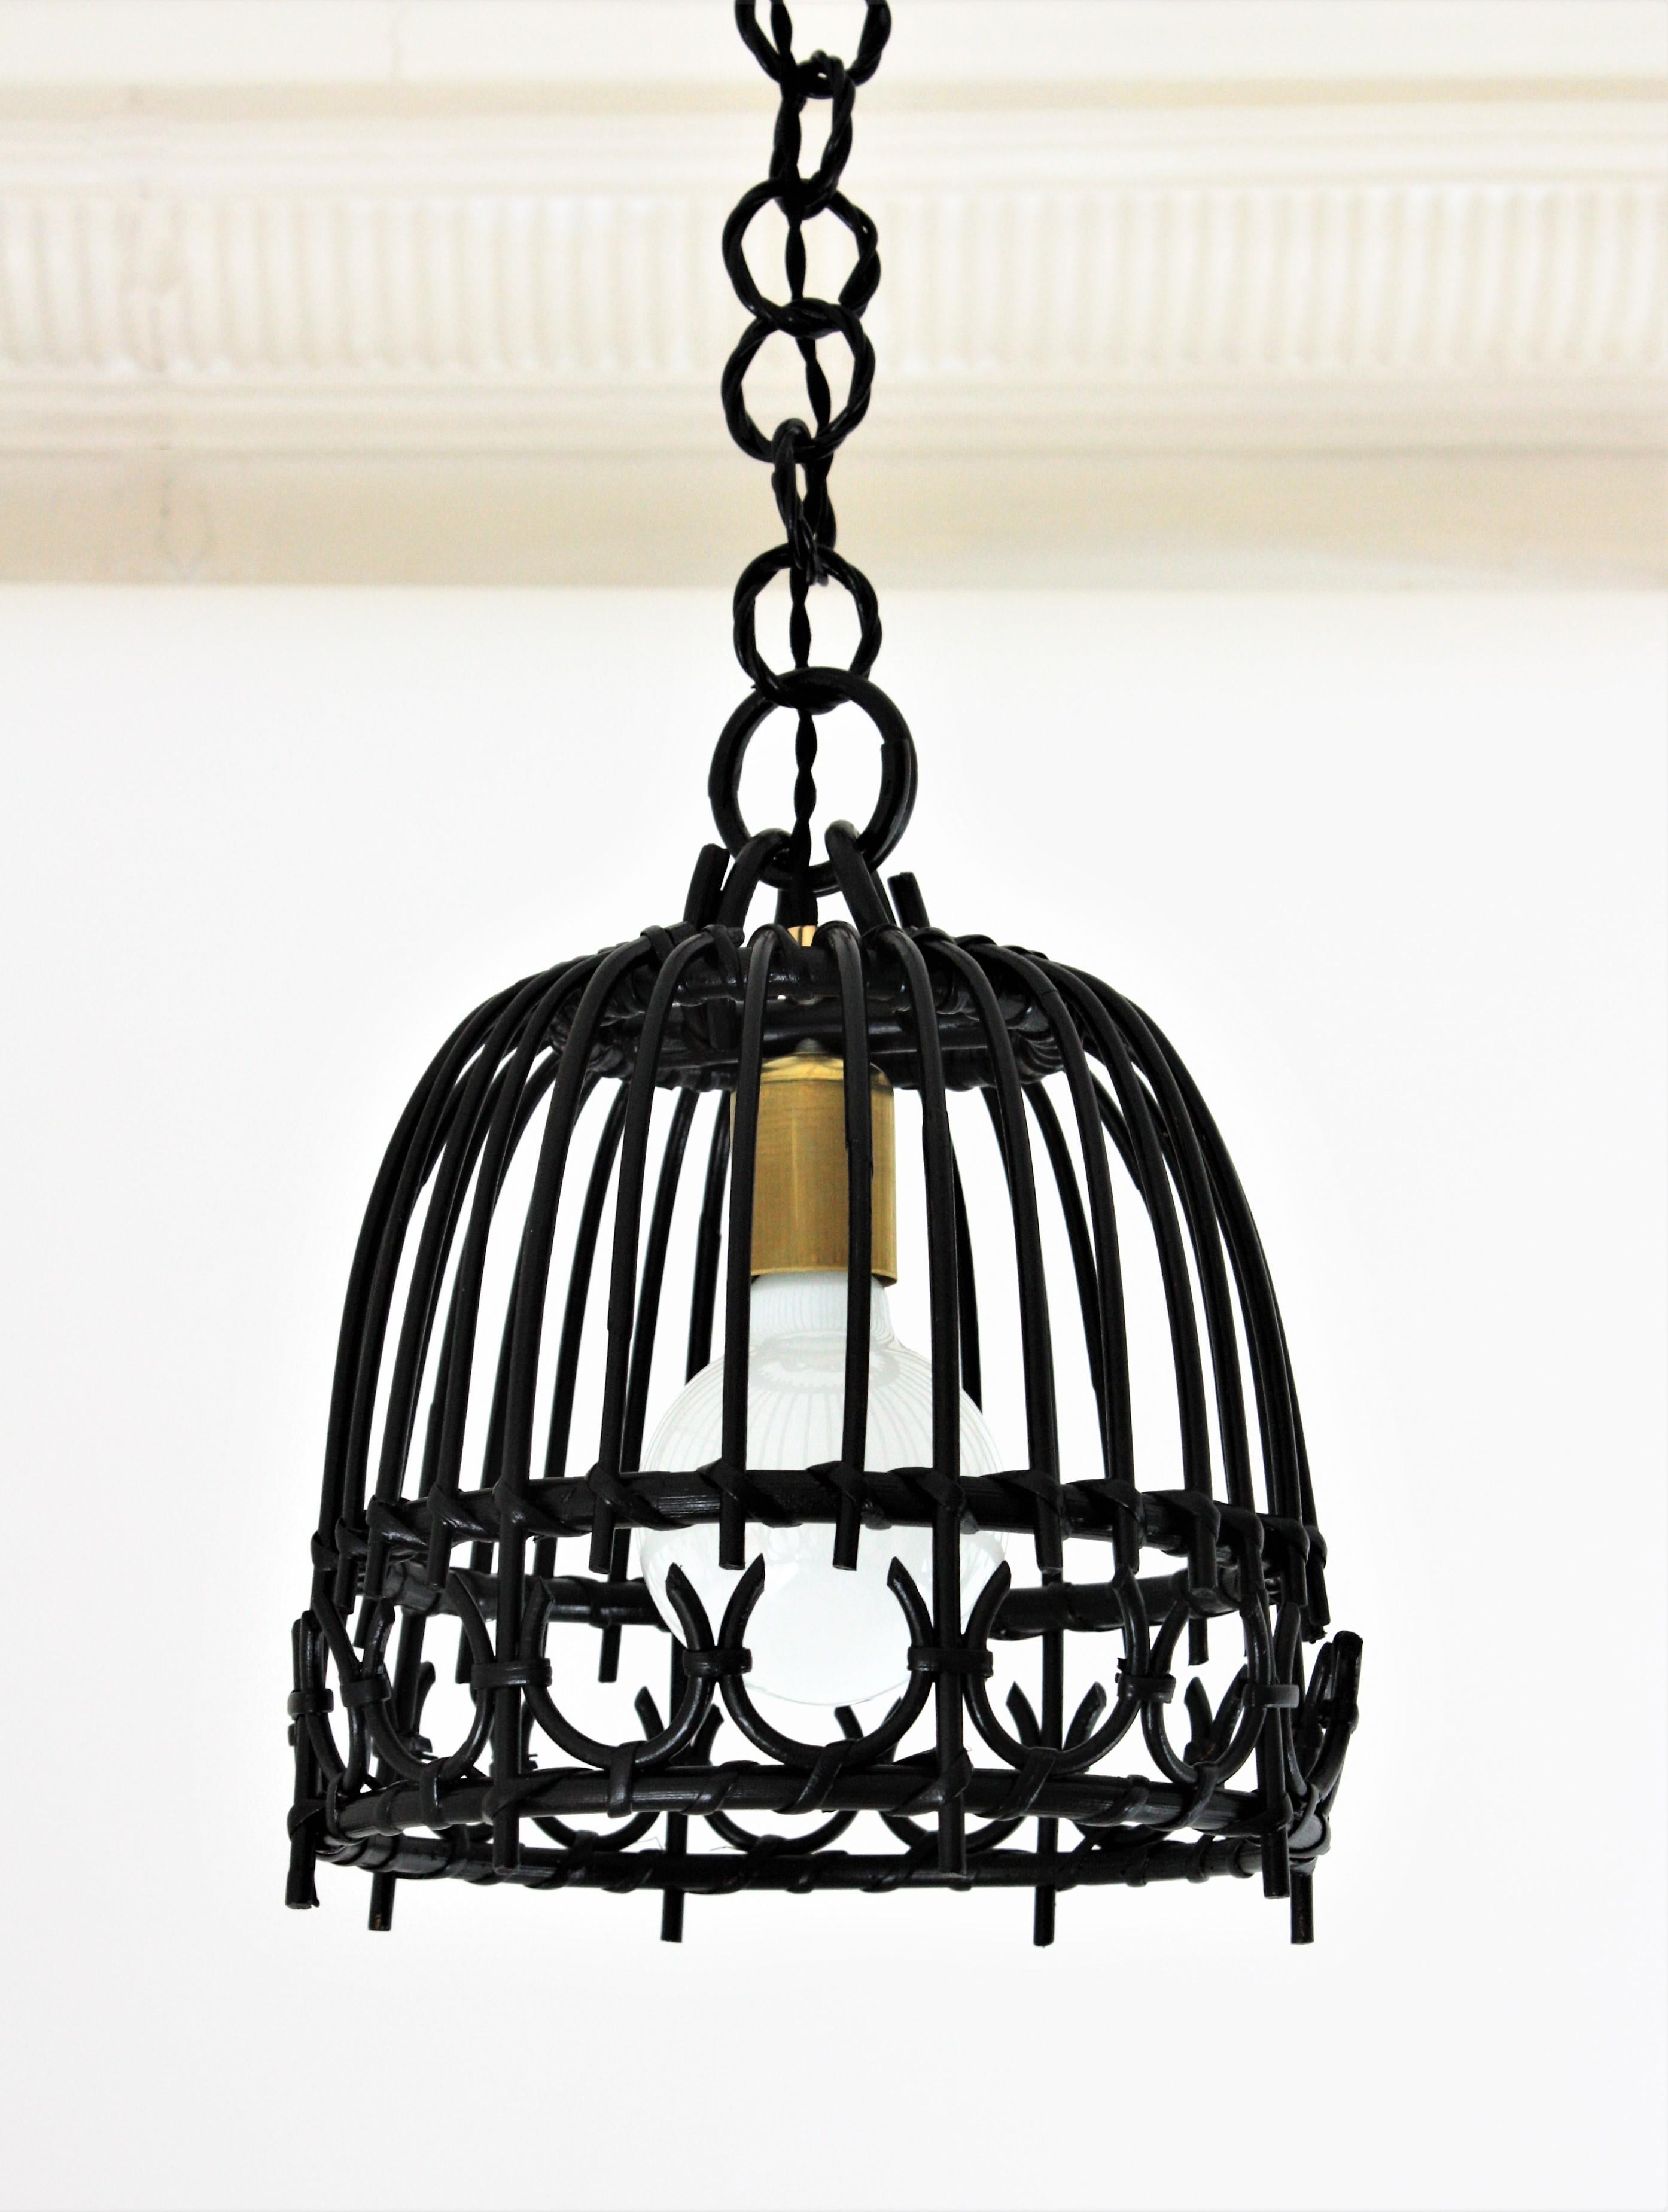 Bamboo Rattan Bell Pendant or Hanging Light in Black Patina, Spain, 1960s For Sale